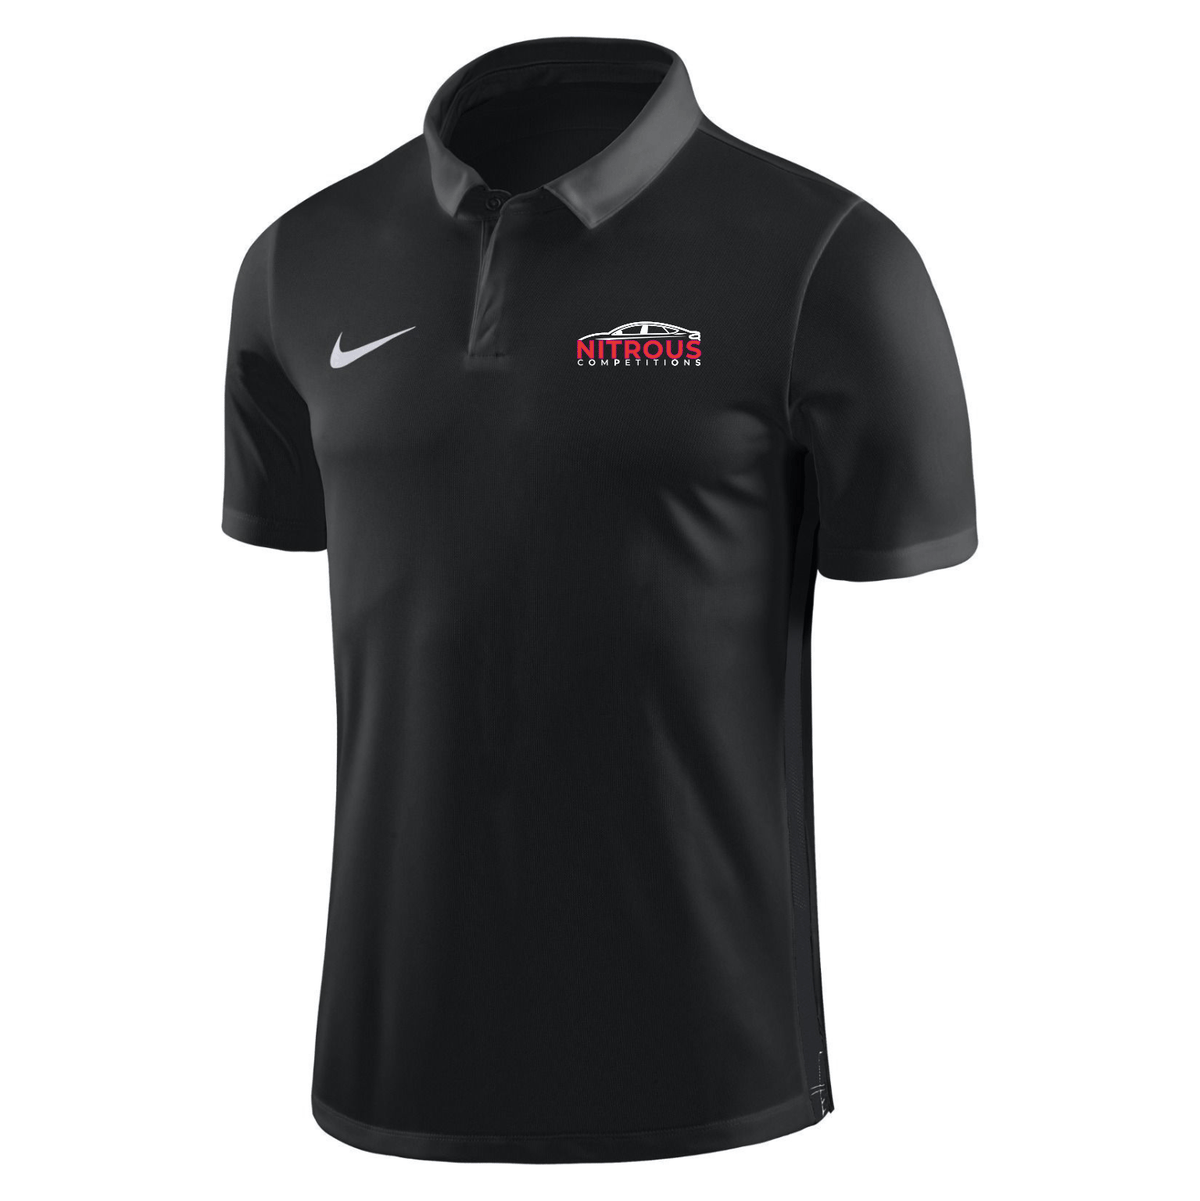 Nitrous Competitions - Nike Black Polo.